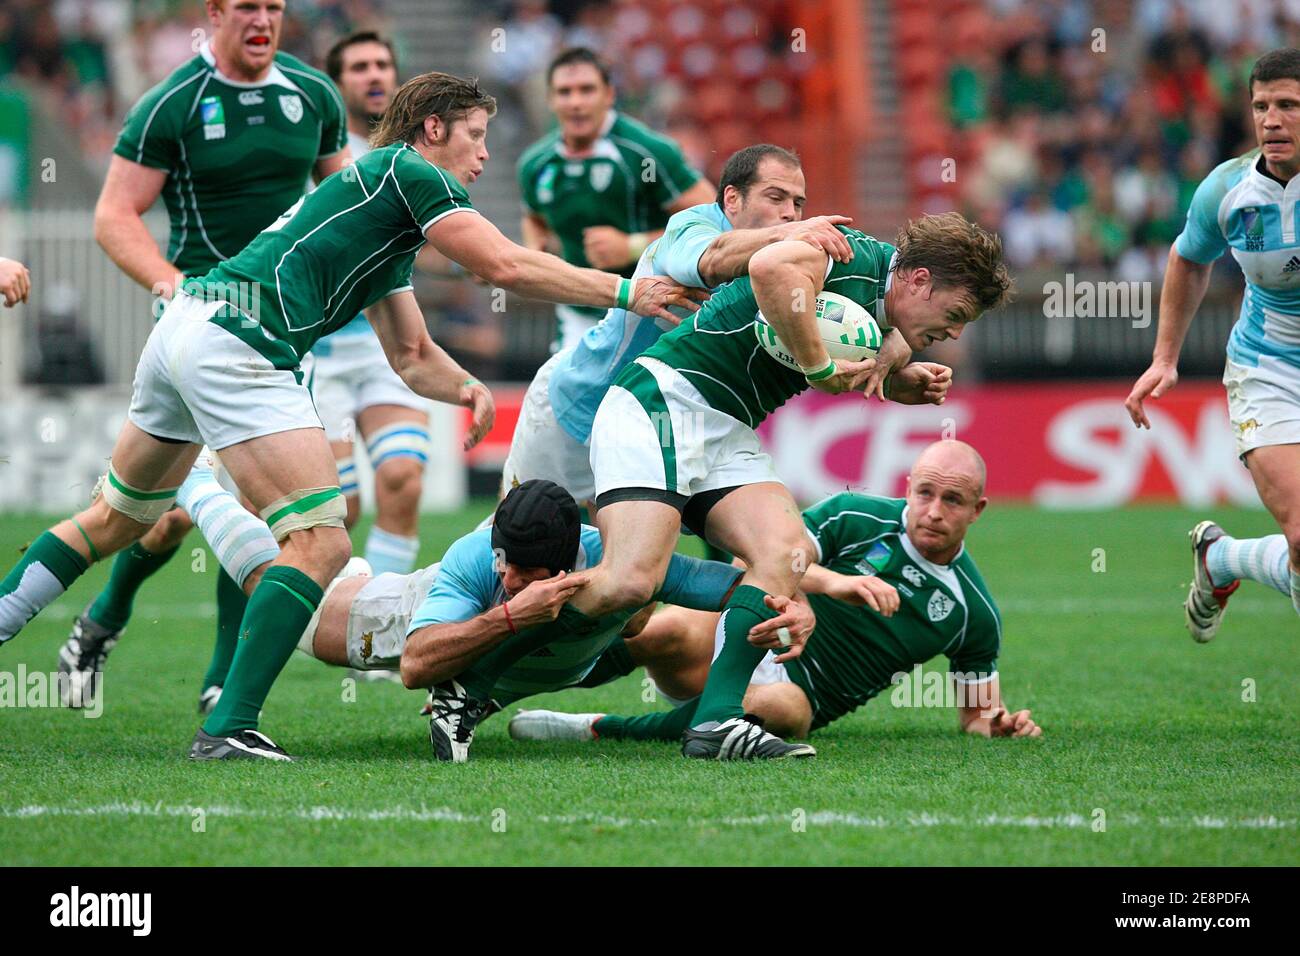 Ireland's Brian O'Driscoll during the IRB Rugby World Cup 2007, Pool D, Ireland  vs Argentina at the Parxc des Princes in Paris, France on September 30,  2007. Argentina won 30-15. Photo by